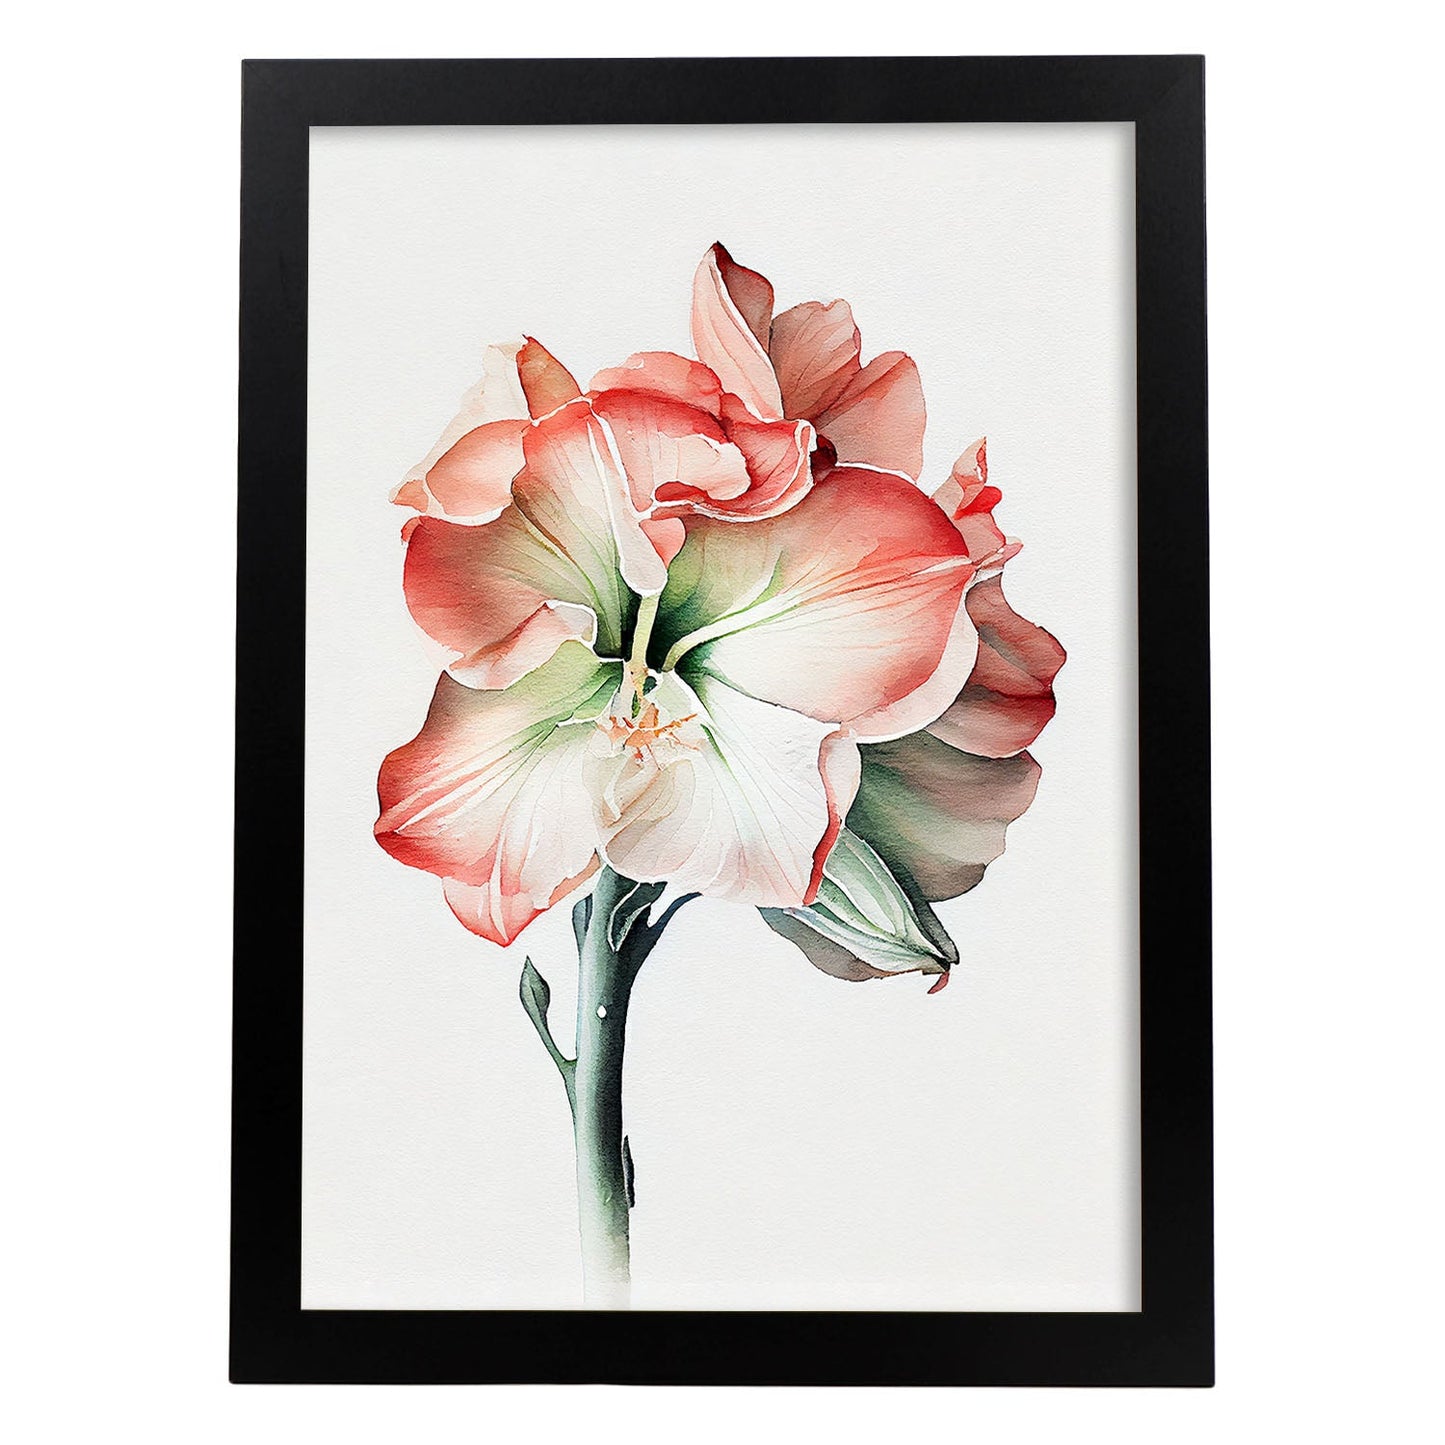 Nacnic watercolor minmal Amaryllis. Aesthetic Wall Art Prints for Bedroom or Living Room Design.